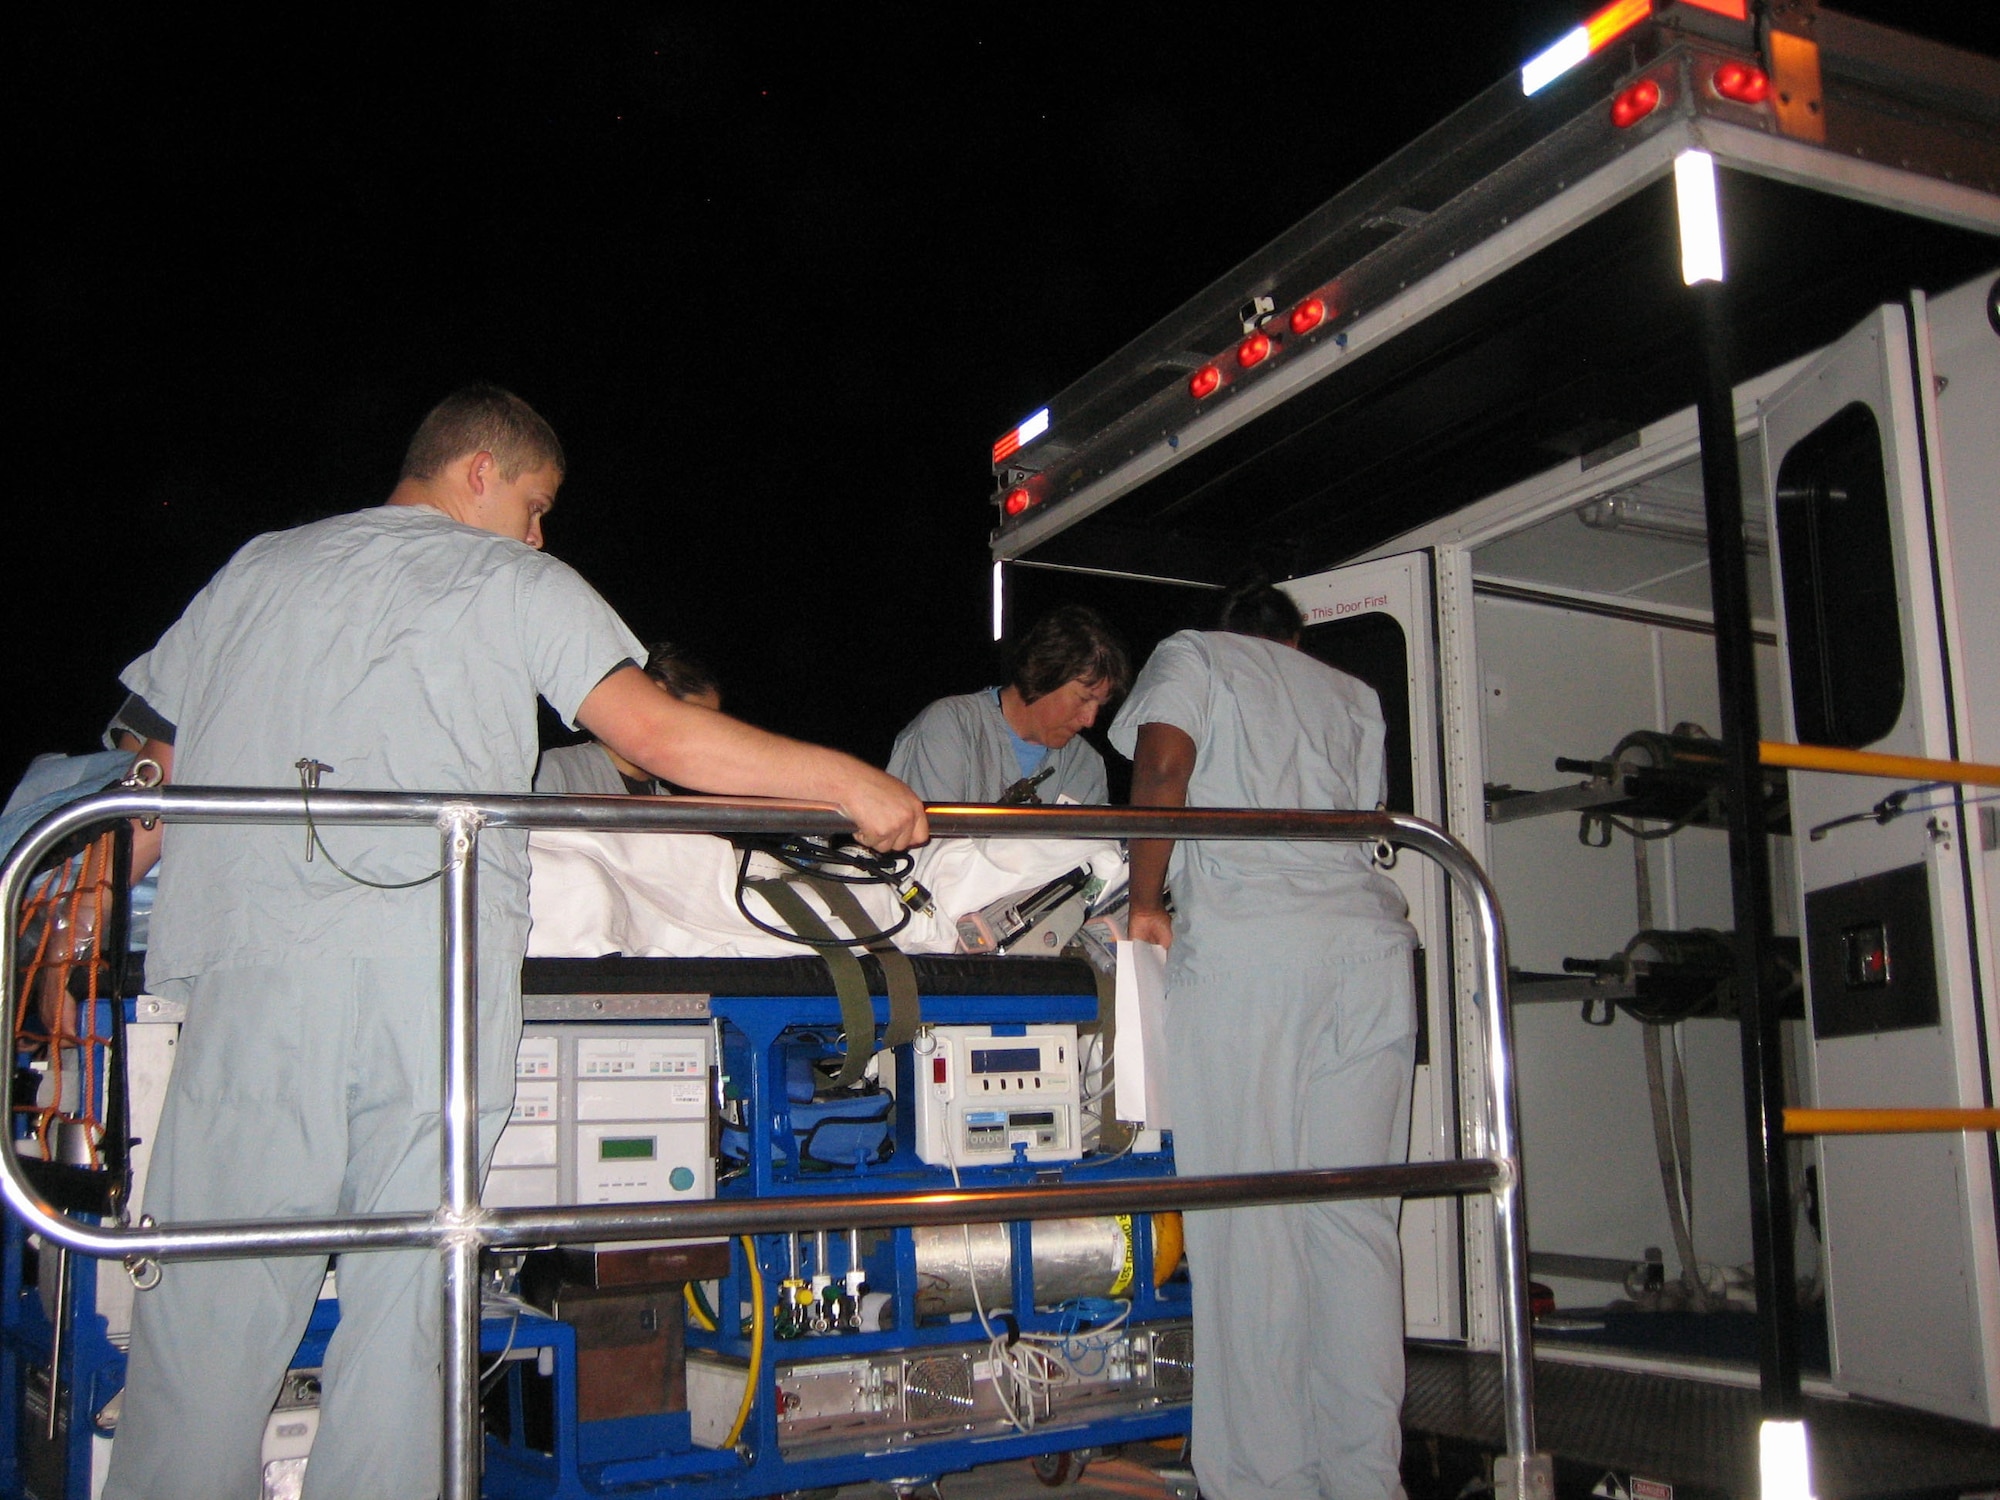 An Extra-Corporeal Membrane Oxygenation team loads a third-generation ECMO cart into an ambulance. The third-generation model is the most current model being used today, and is capable of serving adults. (Courtesy photo/Released)